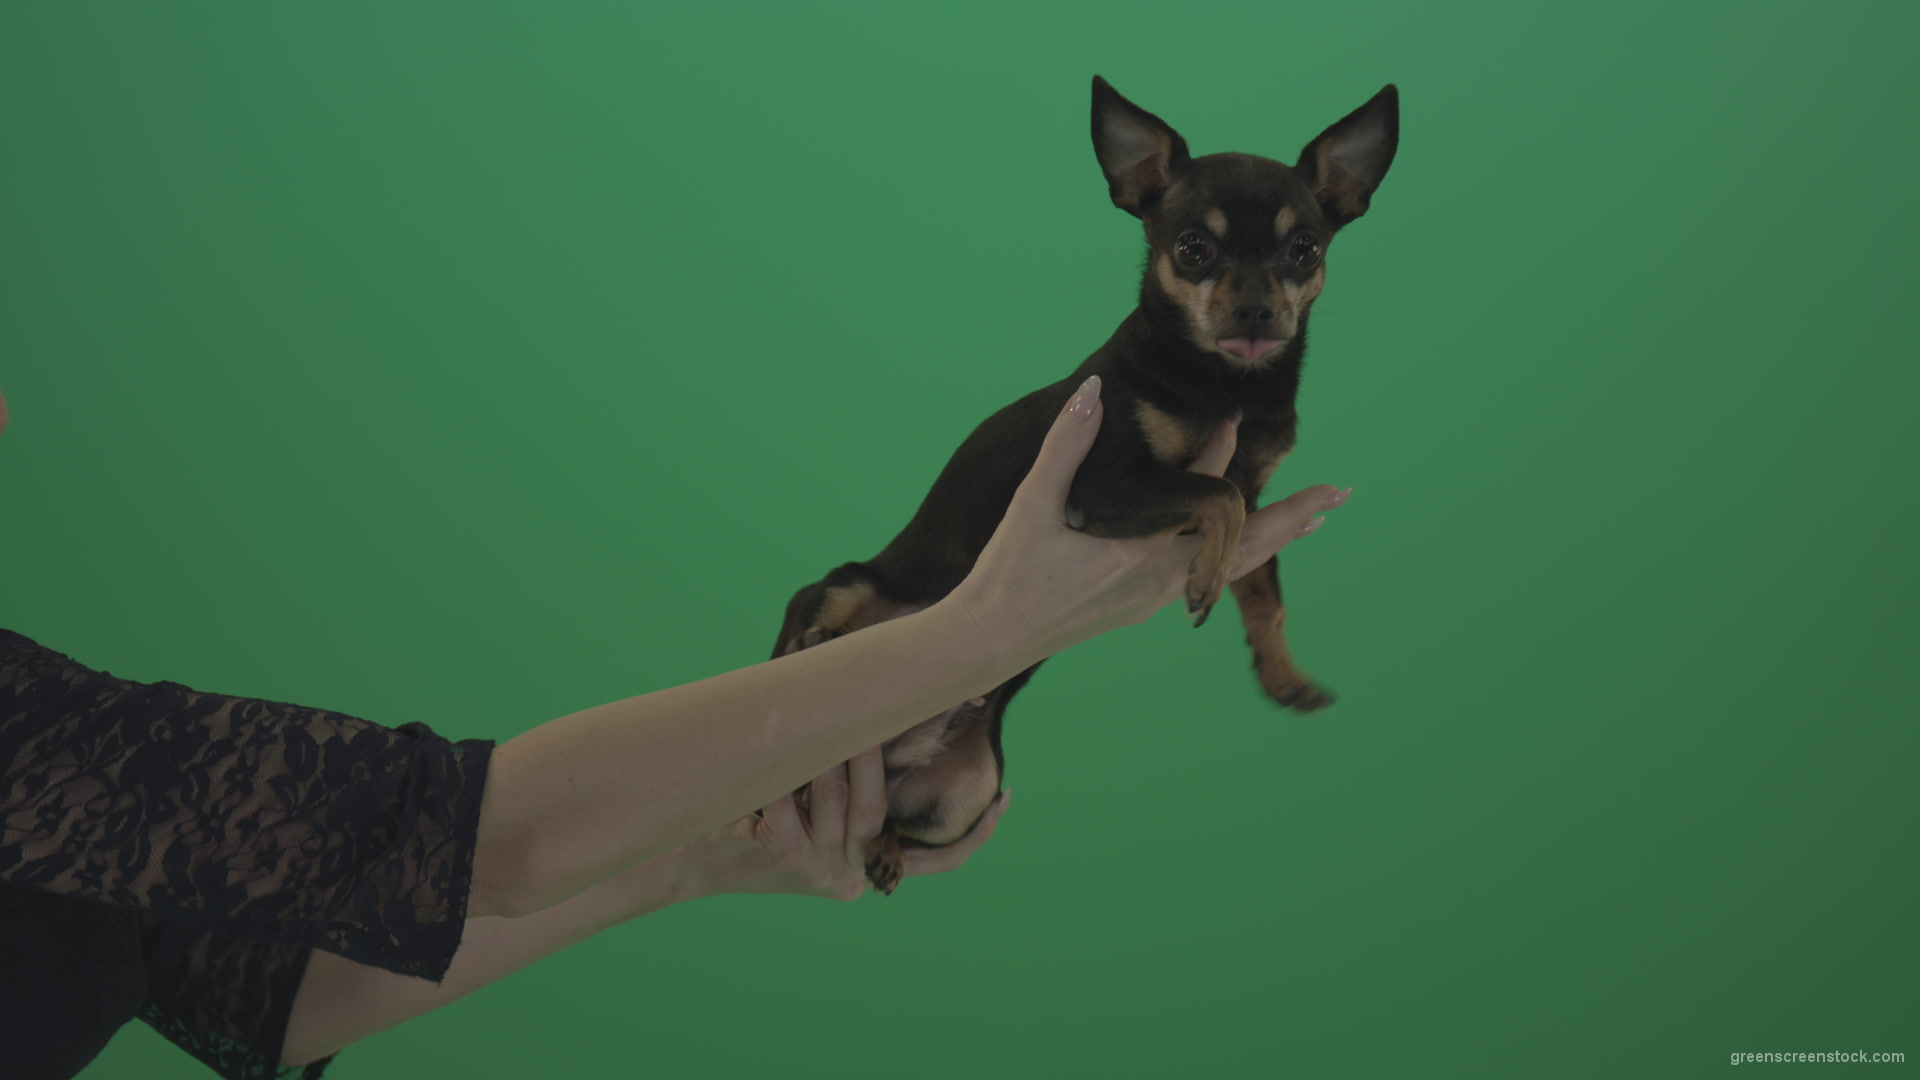 Black-funny-Chihuahua-small-dog-in-female-hands-on-green-screen_009 Green Screen Stock